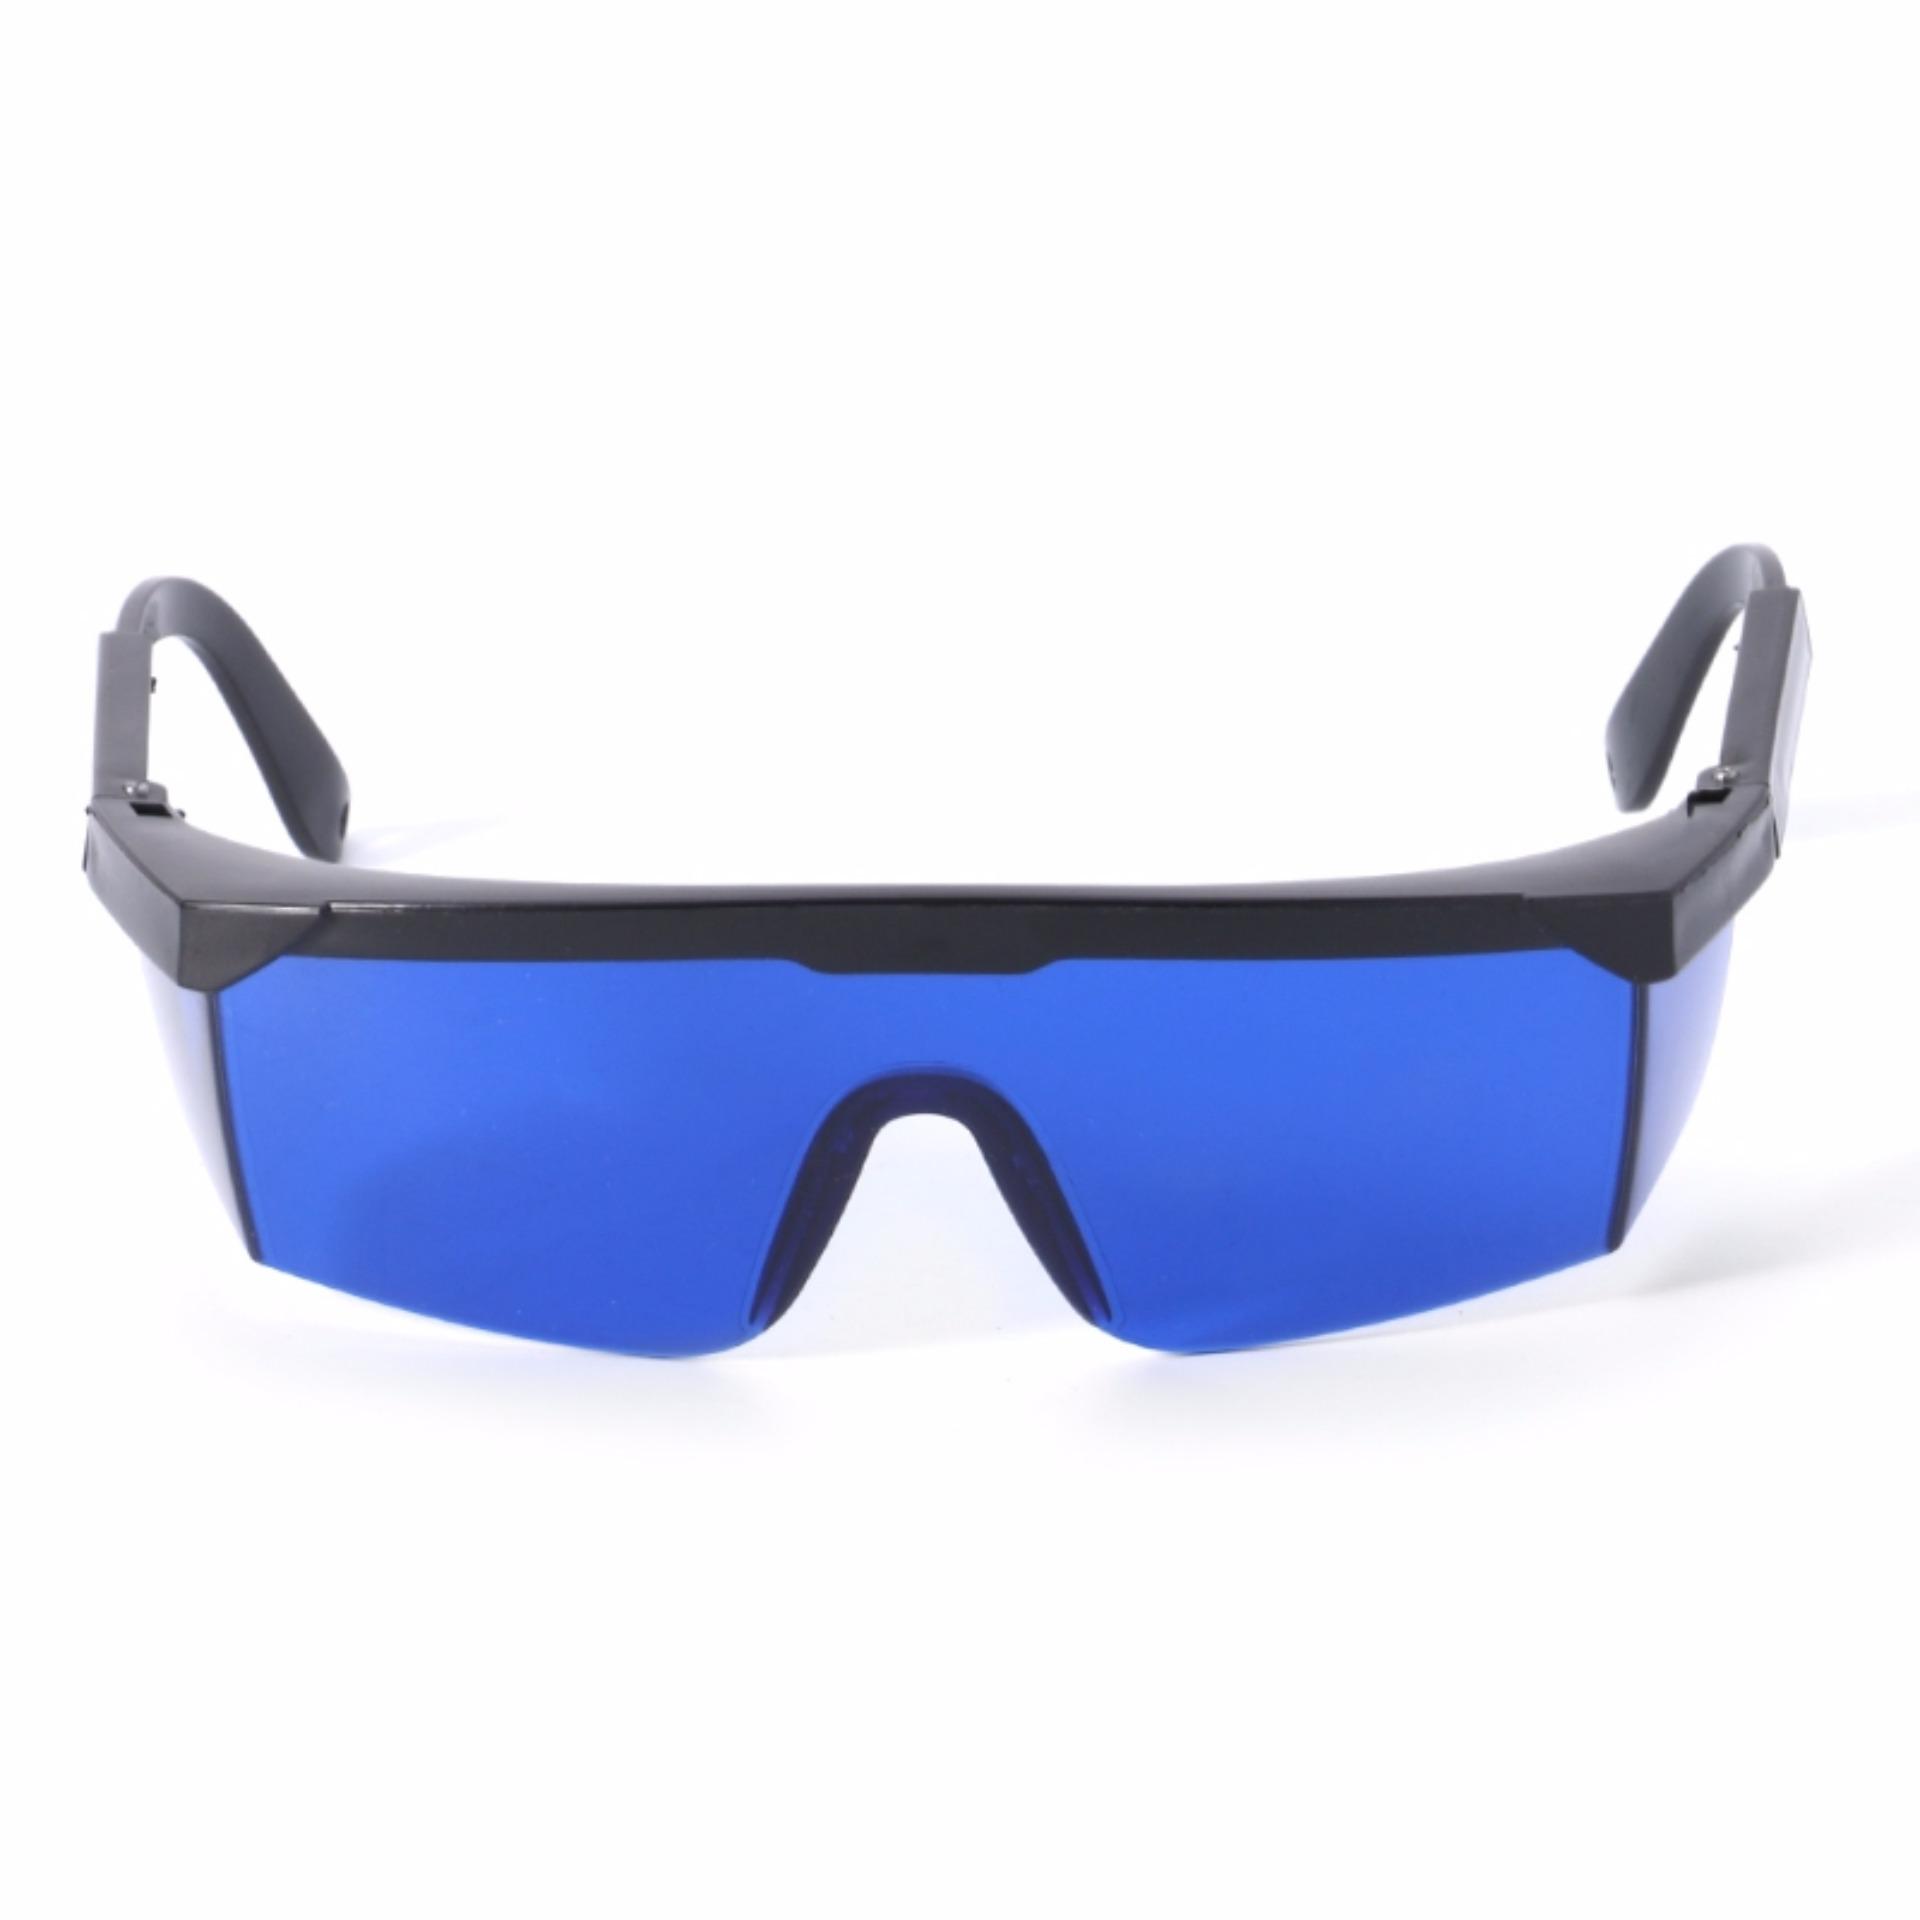 Protection Goggles Laser Safety Glasses Green Blue Eye Spectacles Protective Intl Review And Price